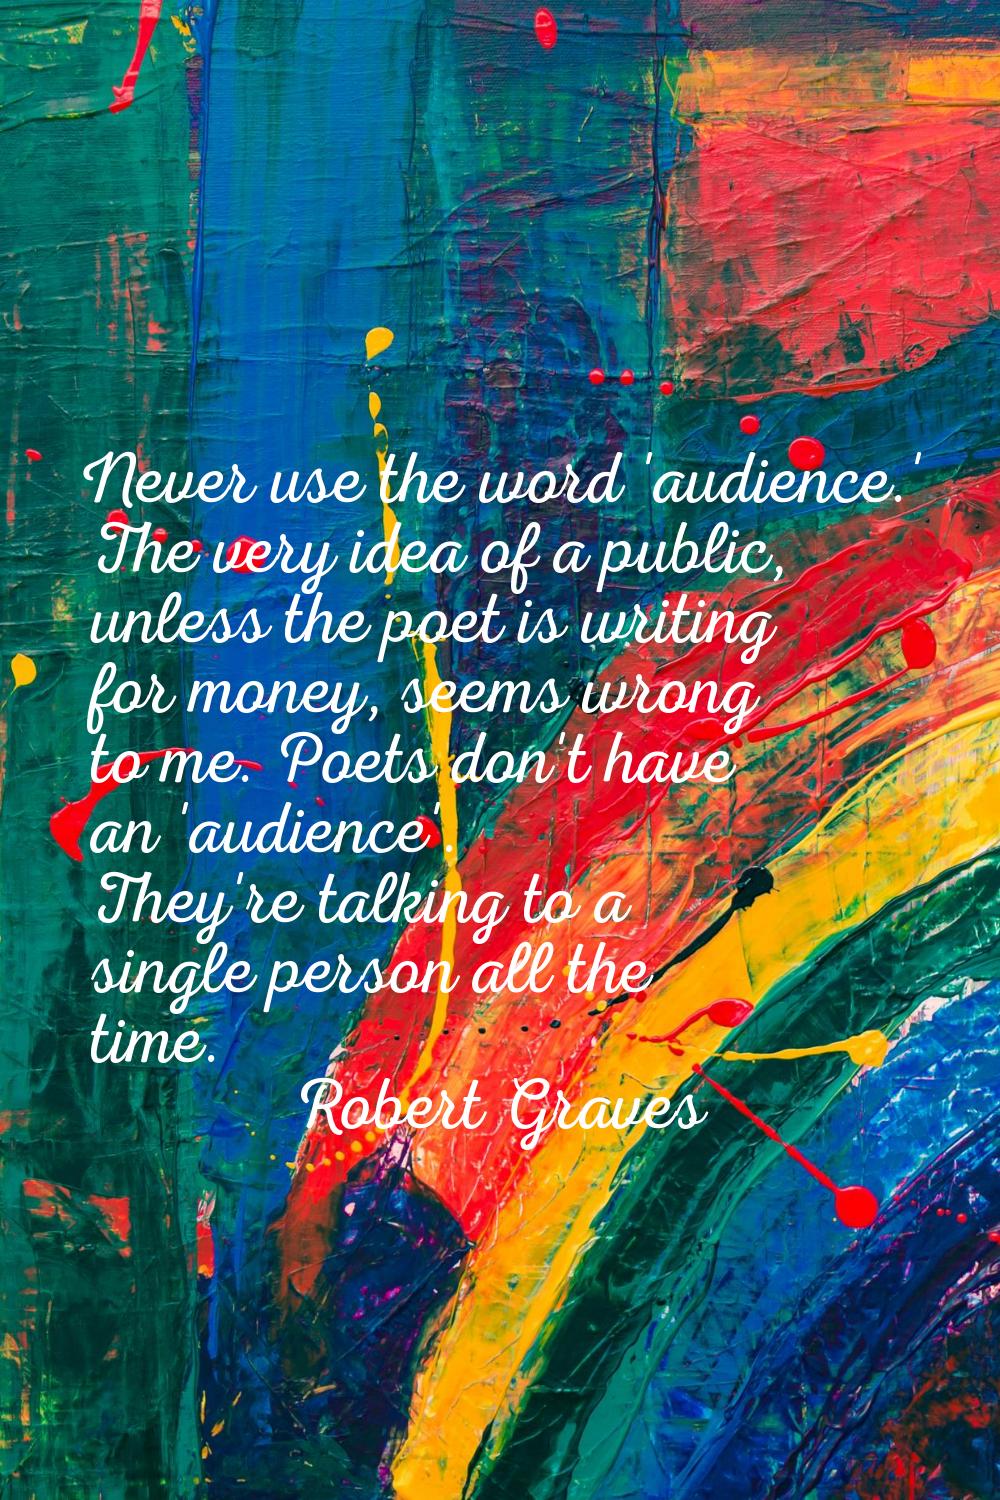 Never use the word 'audience.' The very idea of a public, unless the poet is writing for money, see